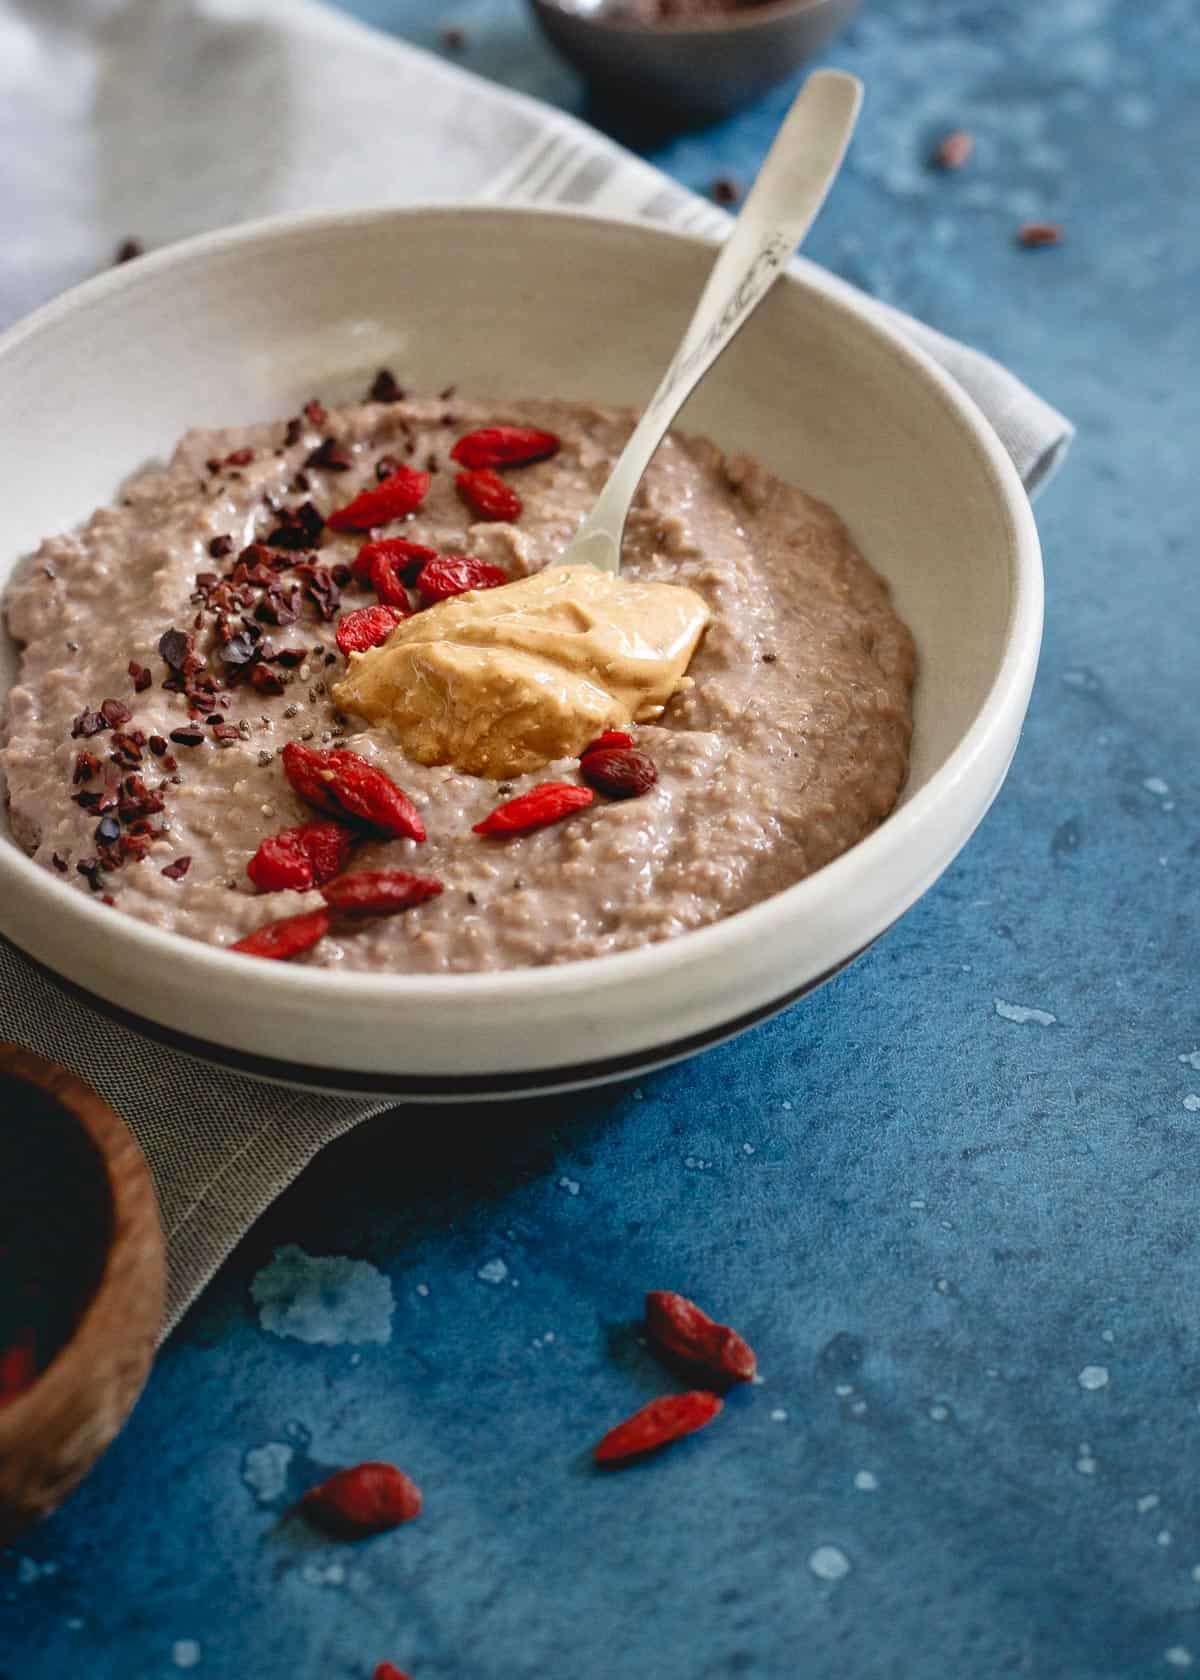 Chocolate Protein Oat Bran is the perfect balance of carbohydrates and protein to refuel after your workout.